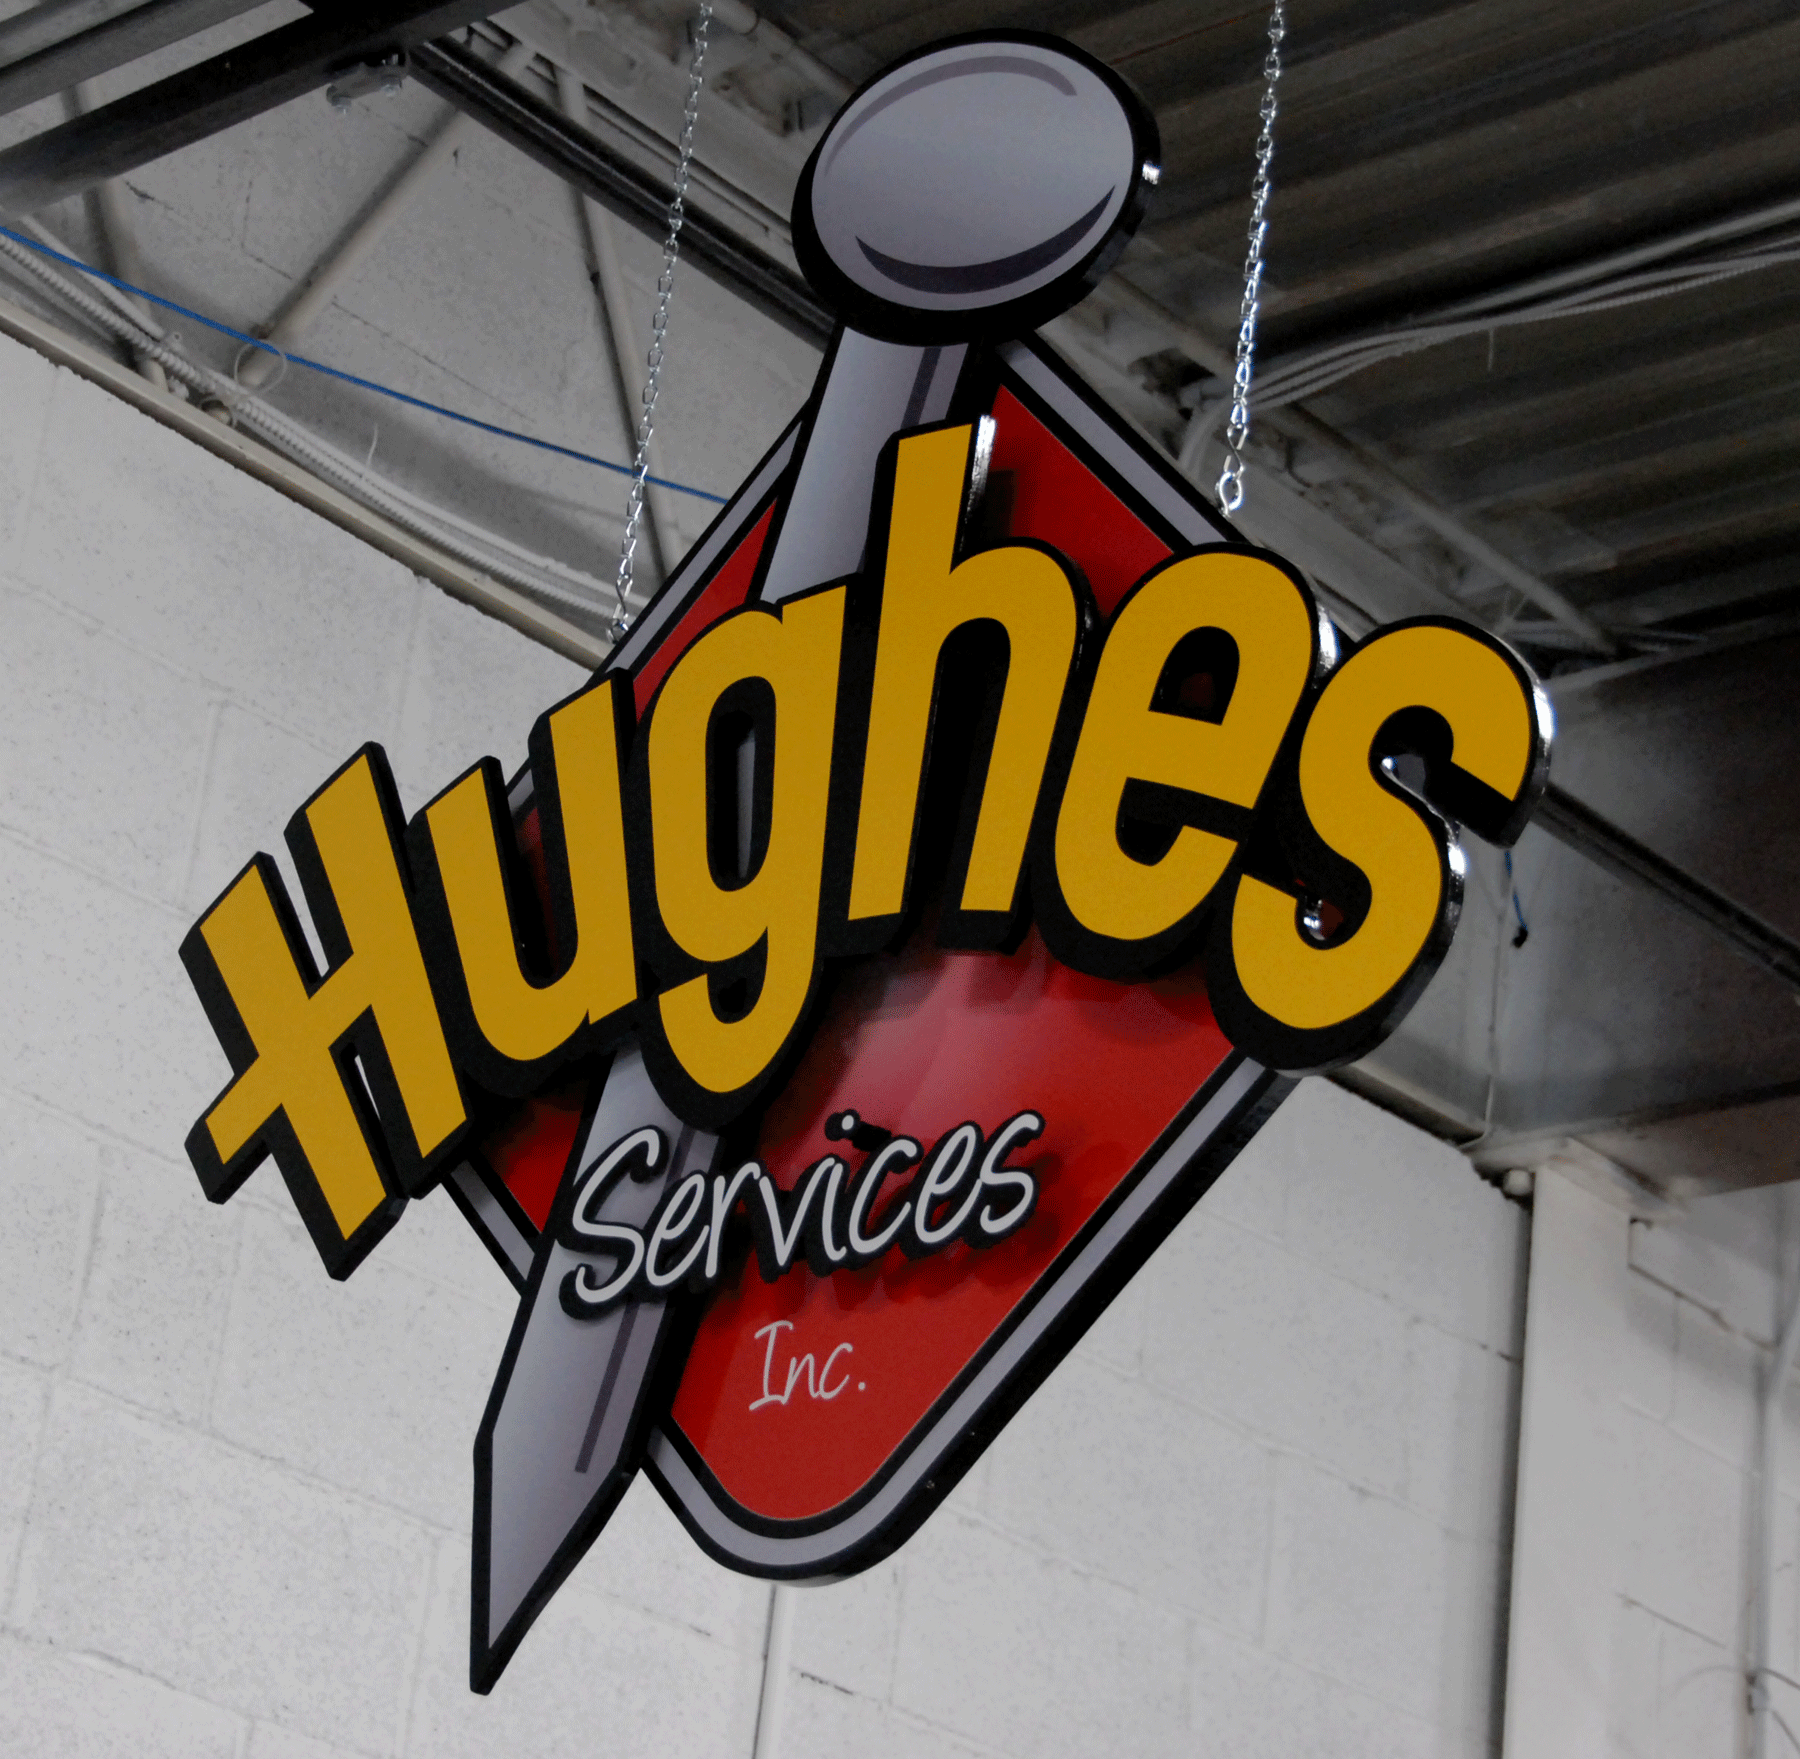 dimensional signage, painted signs, digital signs